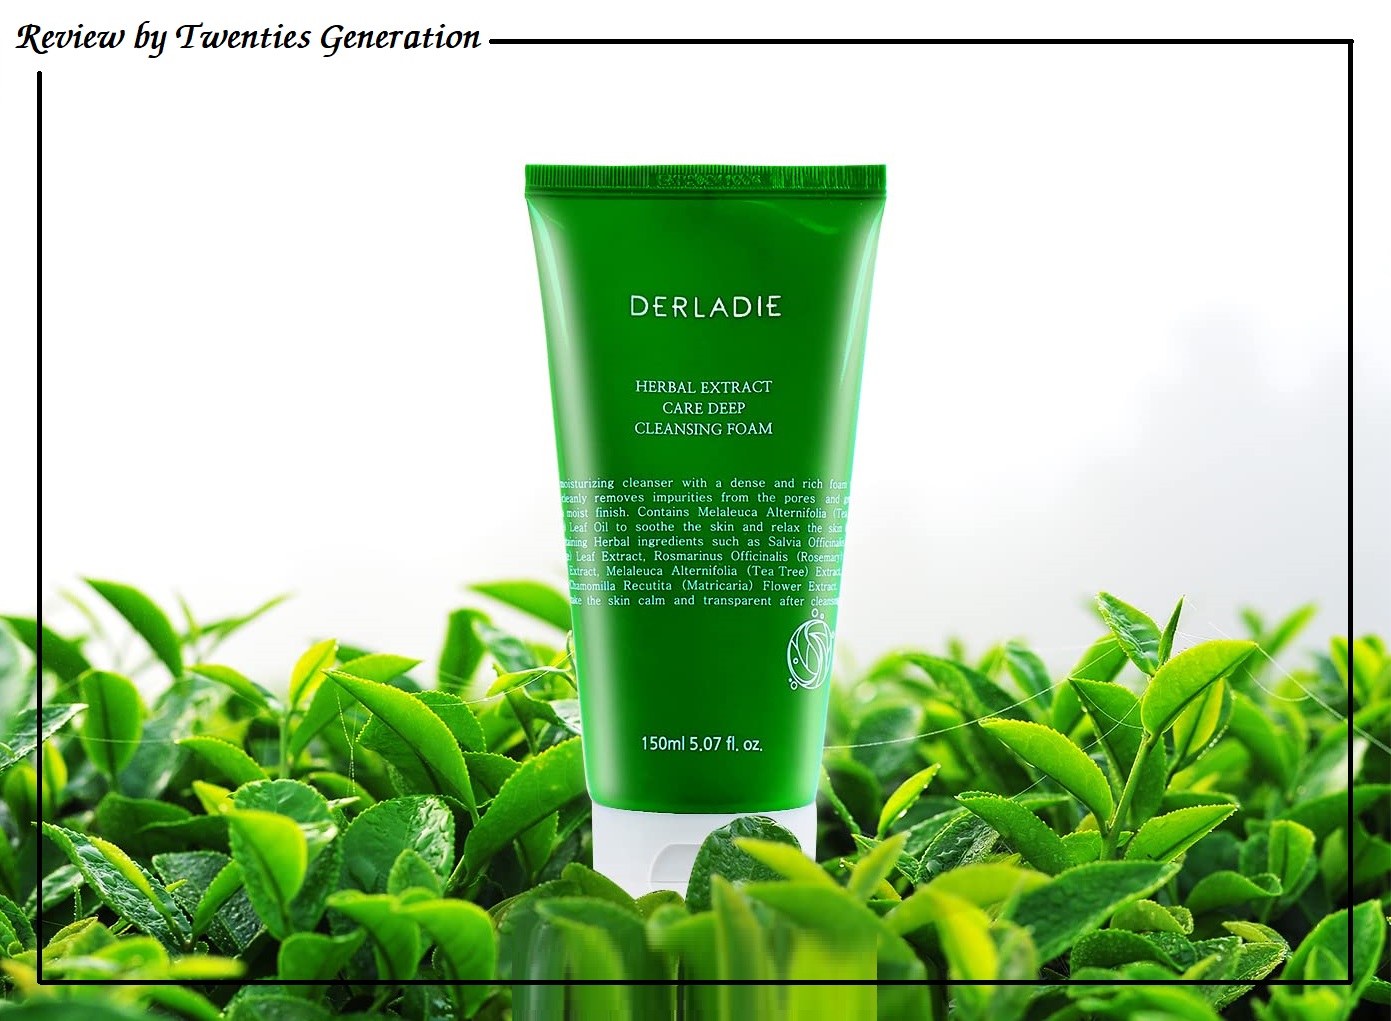 REVIEW THÀNH PHẦN DERLADIE HERBAL EXTRACT CARE DEEP CLEANSING FOAM